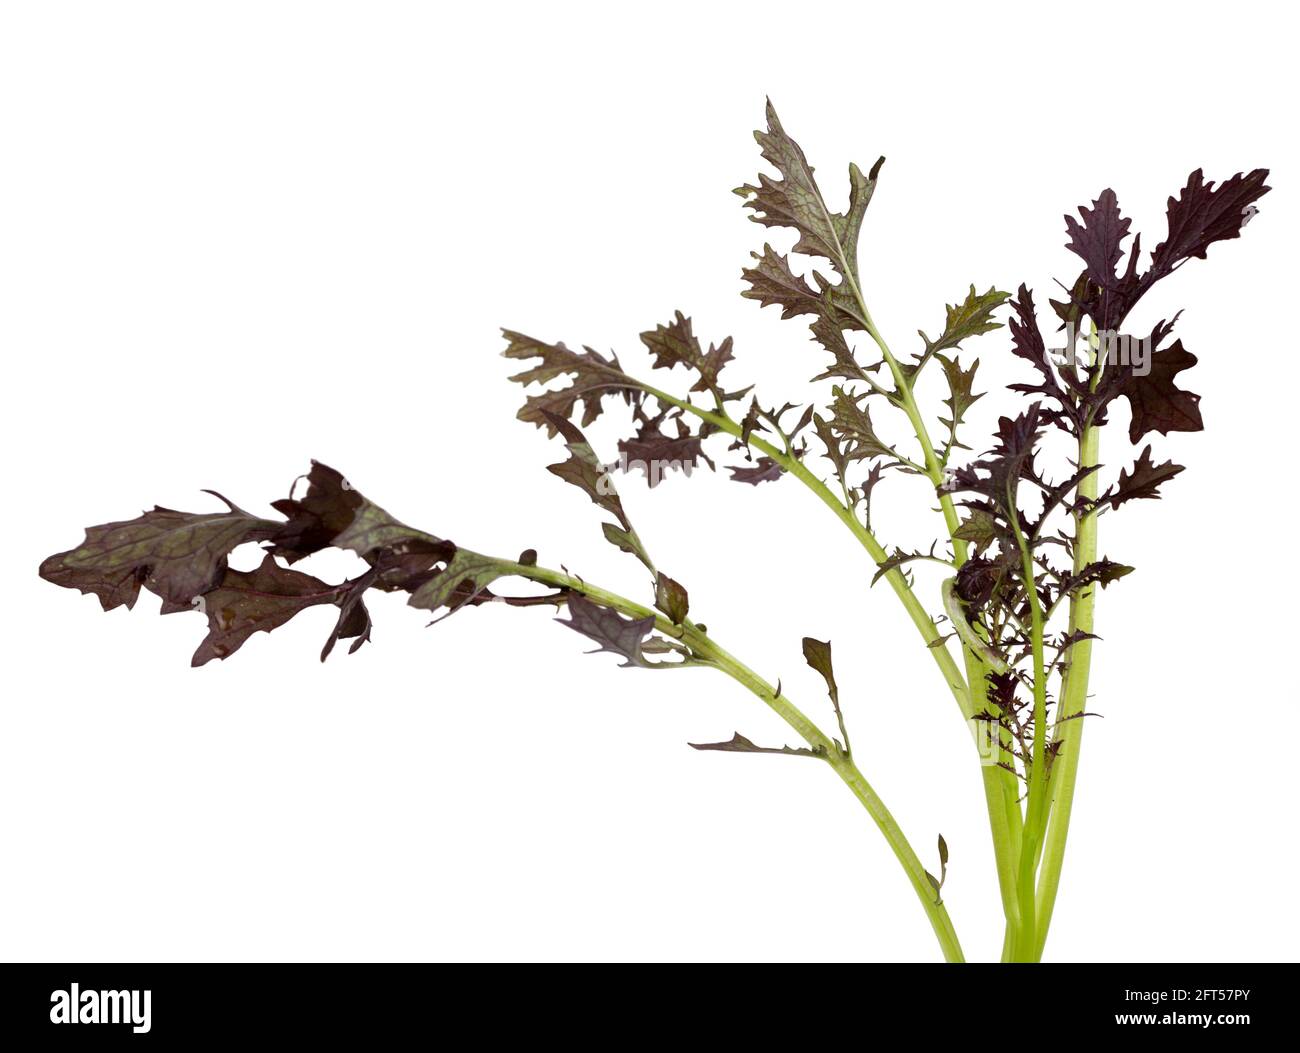 Freshly picked leaves of the organically grown salad mustard, Brassica juncea 'Red Lace', on a white background Stock Photo